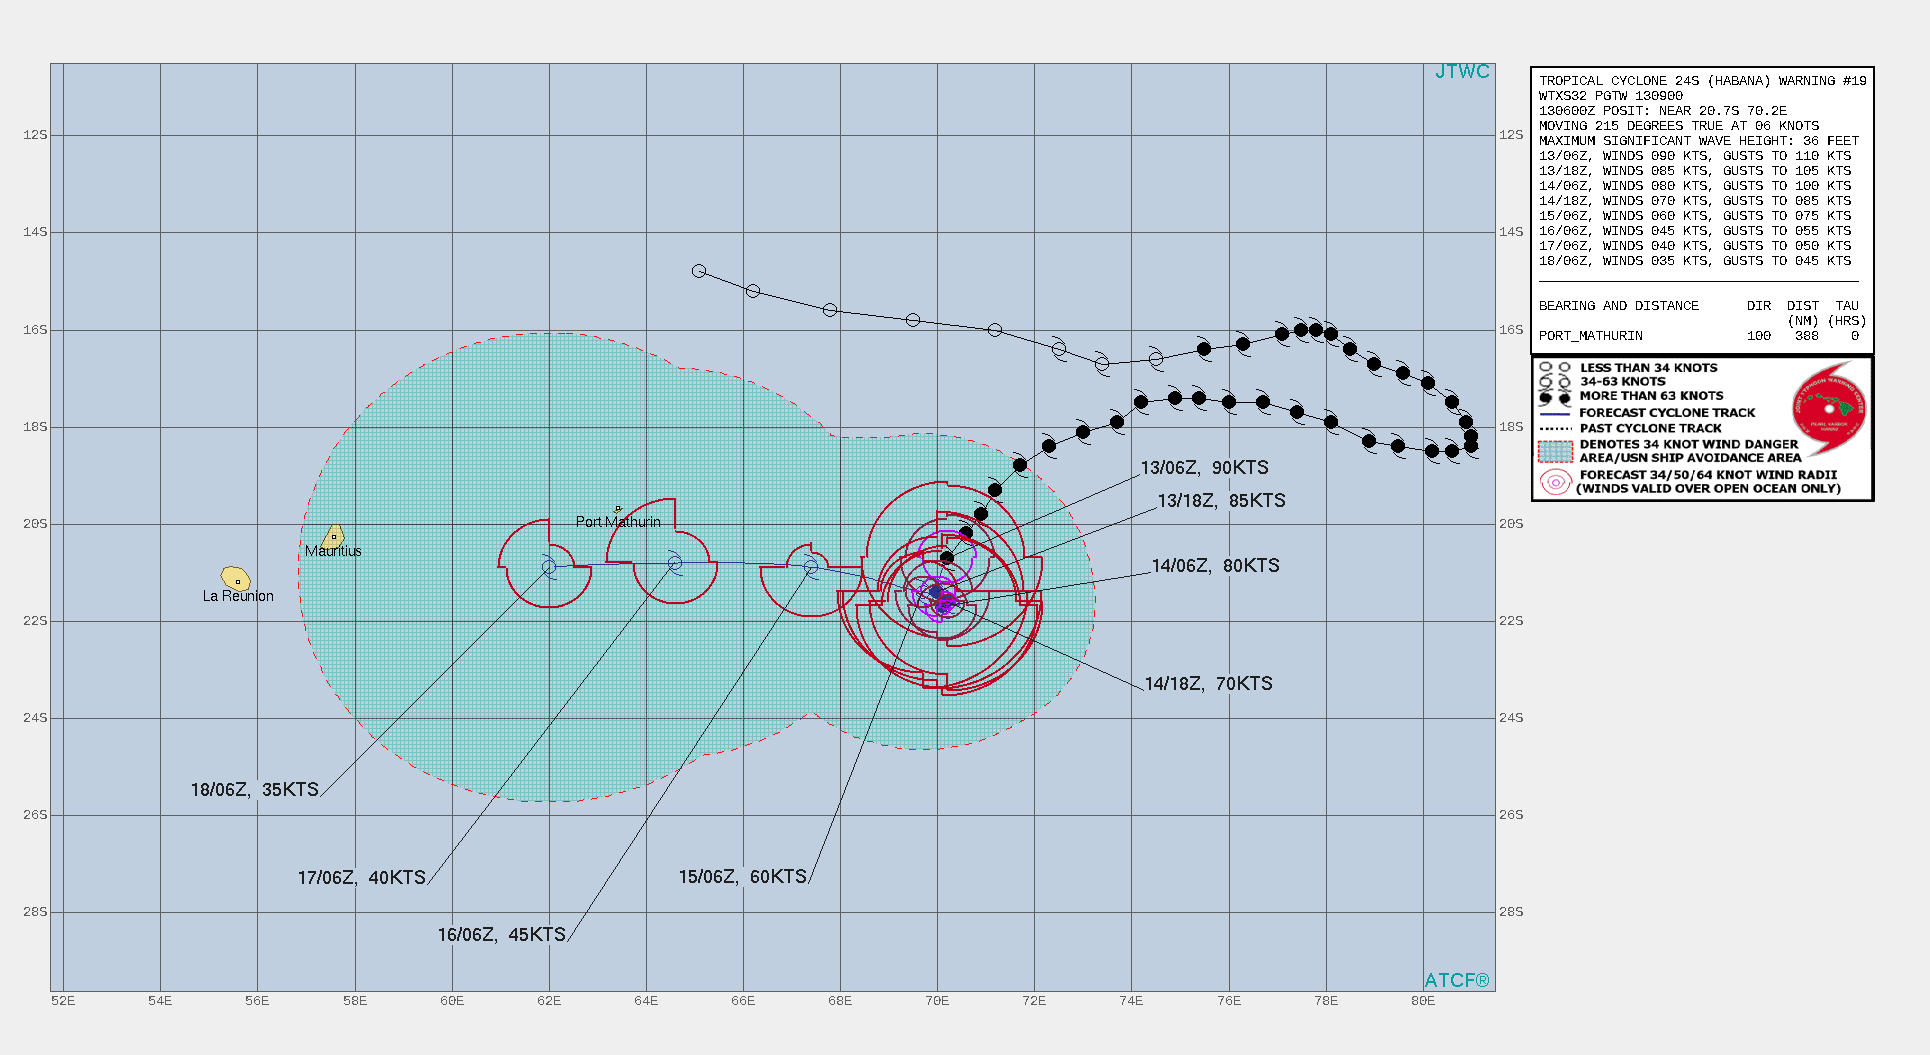 24S(HABANA). WARNING 19 ISSUED AT 13/09UTC. 24S IS WEAKENING SLIGHTLY FASTER THAN INDICATED BY THE WARNING WHICH WAS CALLING FOR AN INTENSITY OF 85KNOTS AT 13/18UTC.